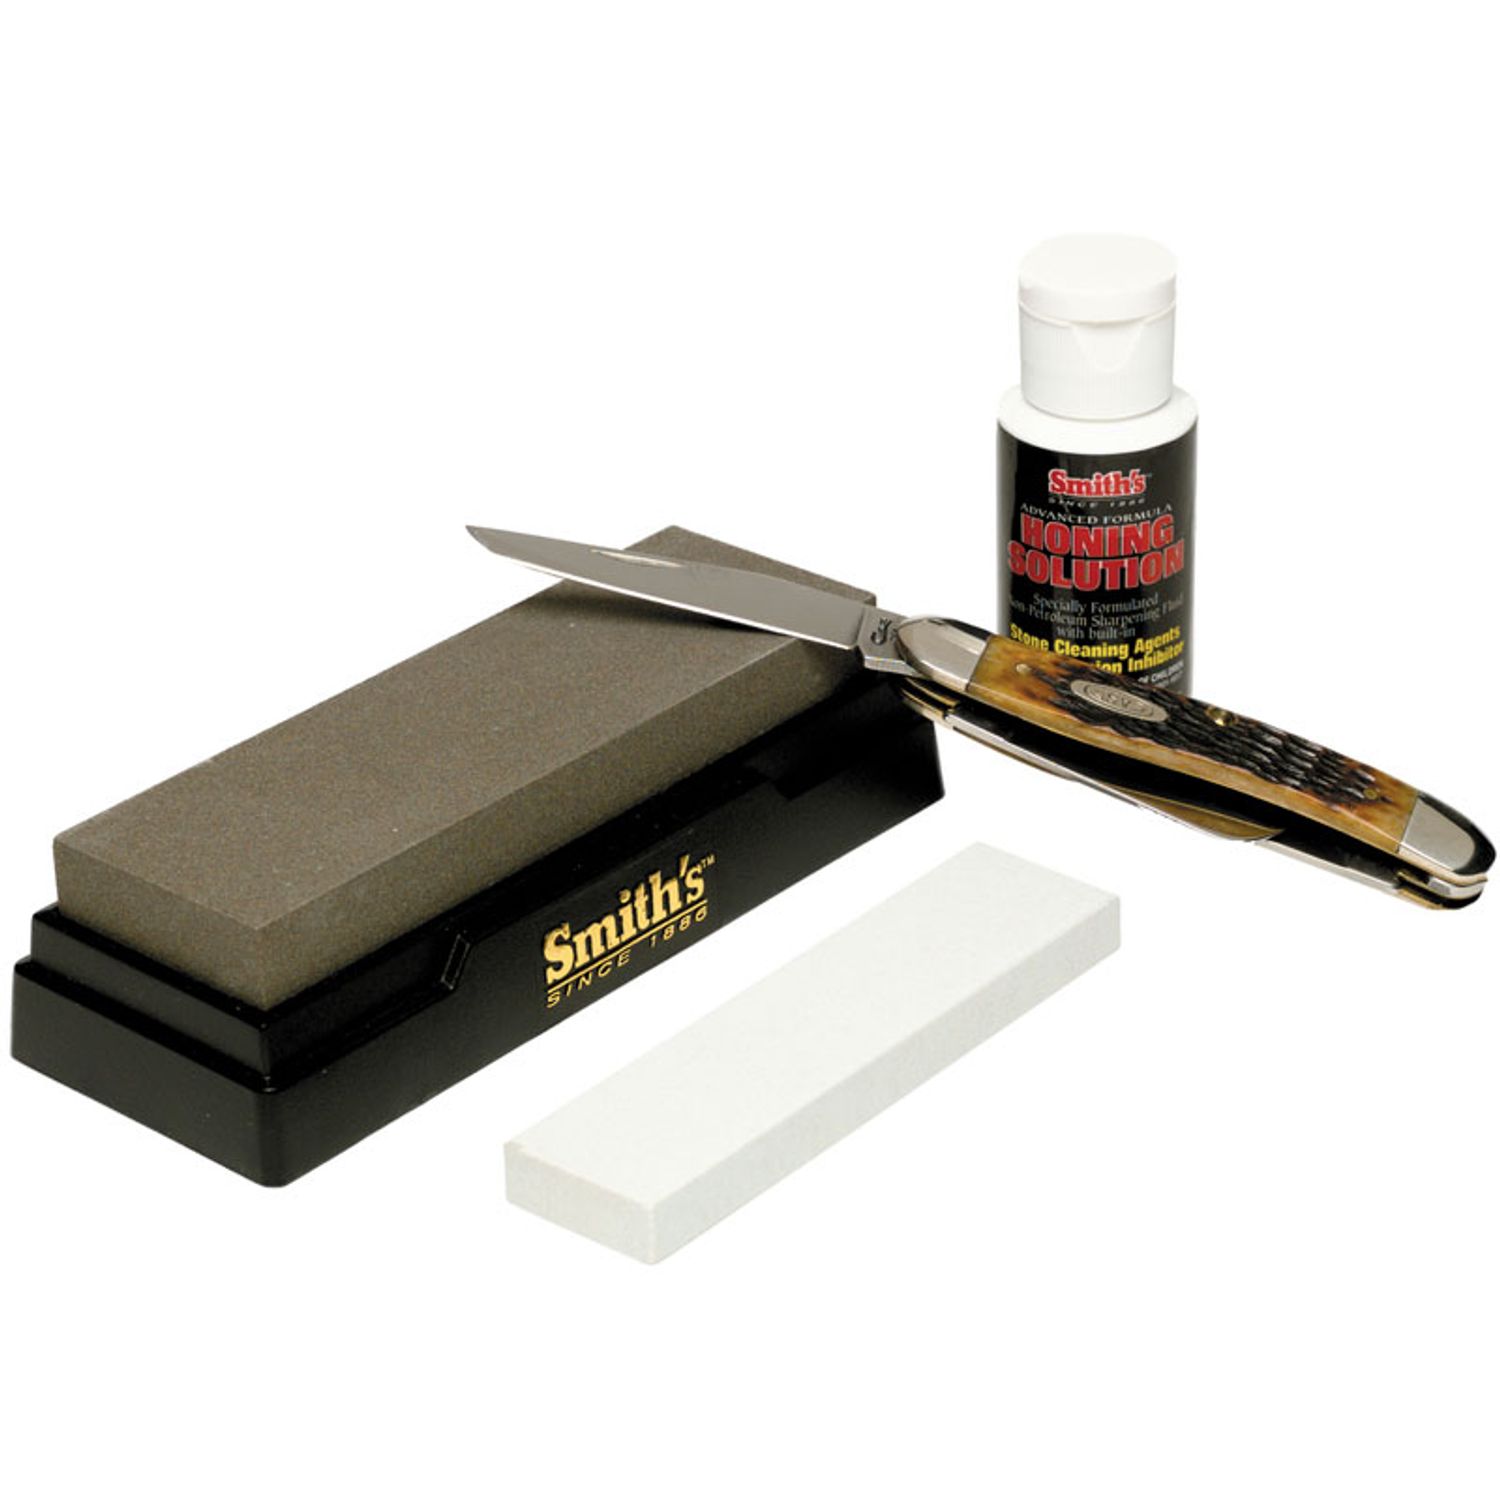 Smith's Smith's Diamond Combination Sharpener in the Sharpeners department  at